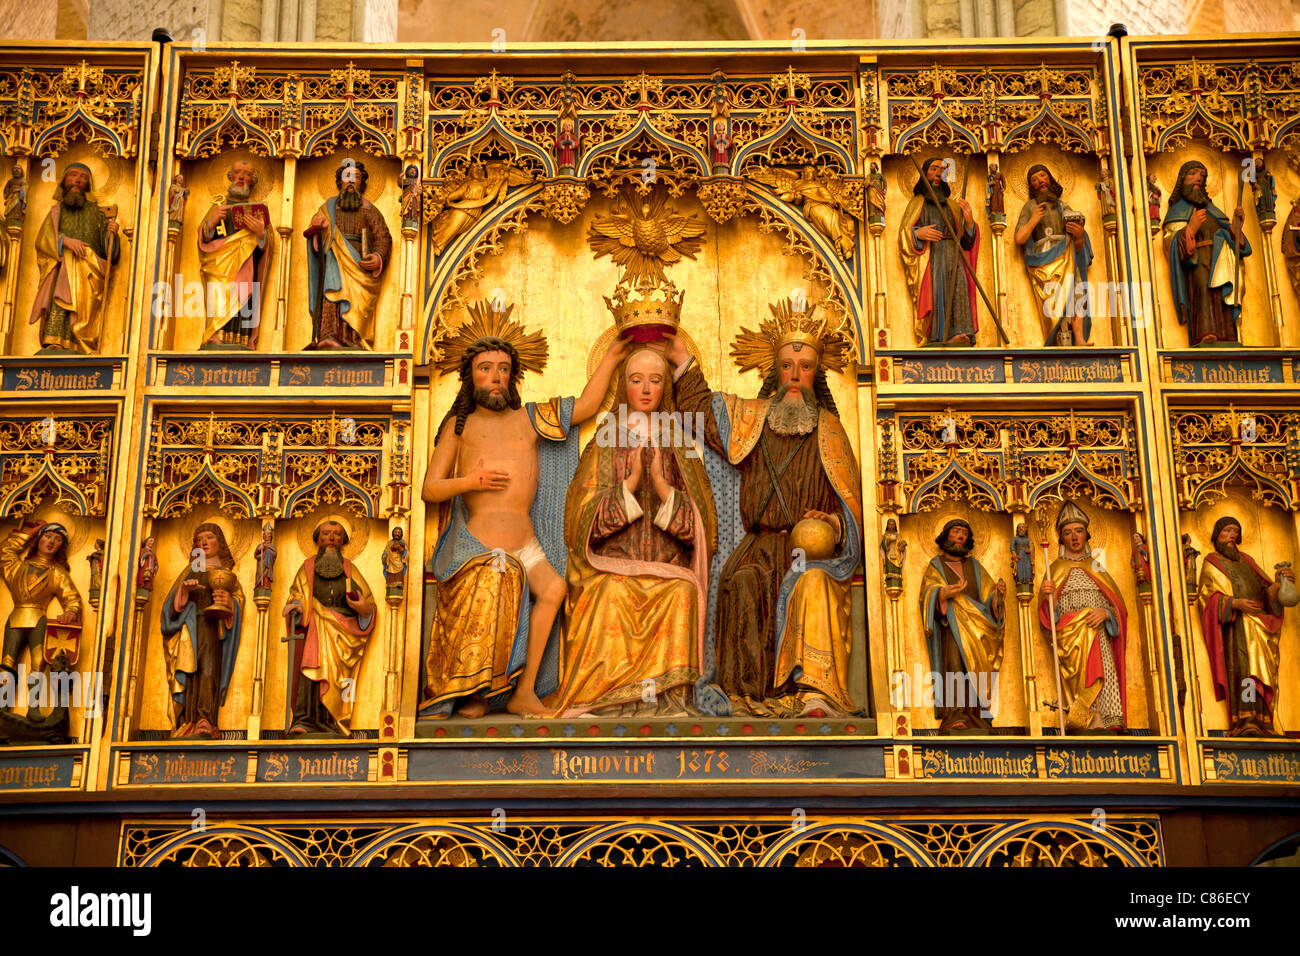 famous Altar of the Coronation Virgin Mary inside the Marienkirche or St. Mary's church, Stralsund, Germany Stock Photo